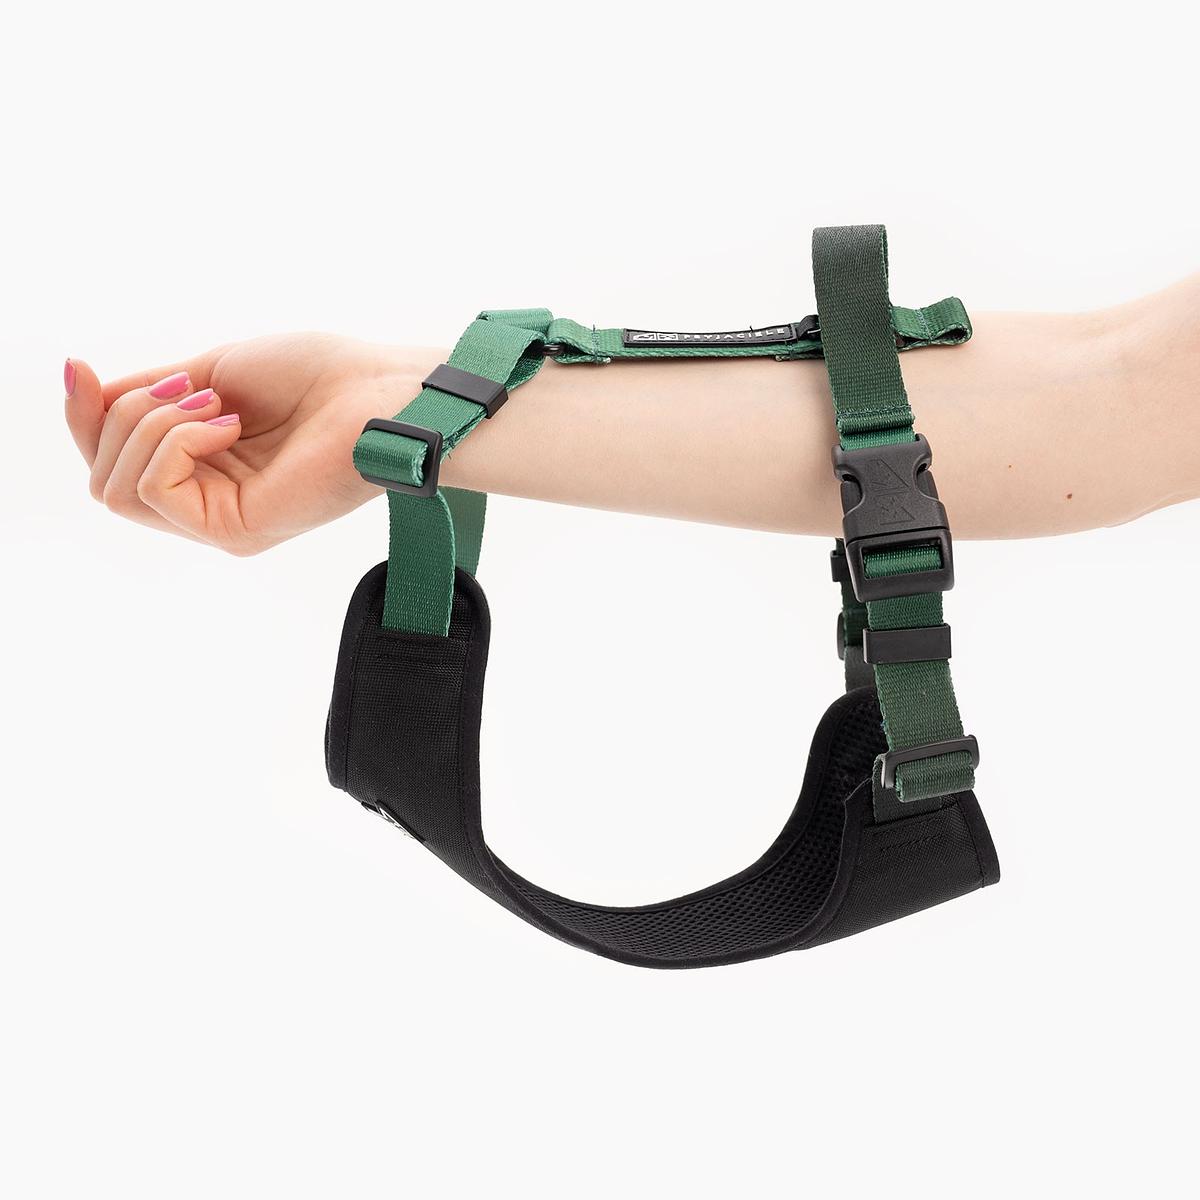 Dog or cat pressure free harness "Under my ombrella" green